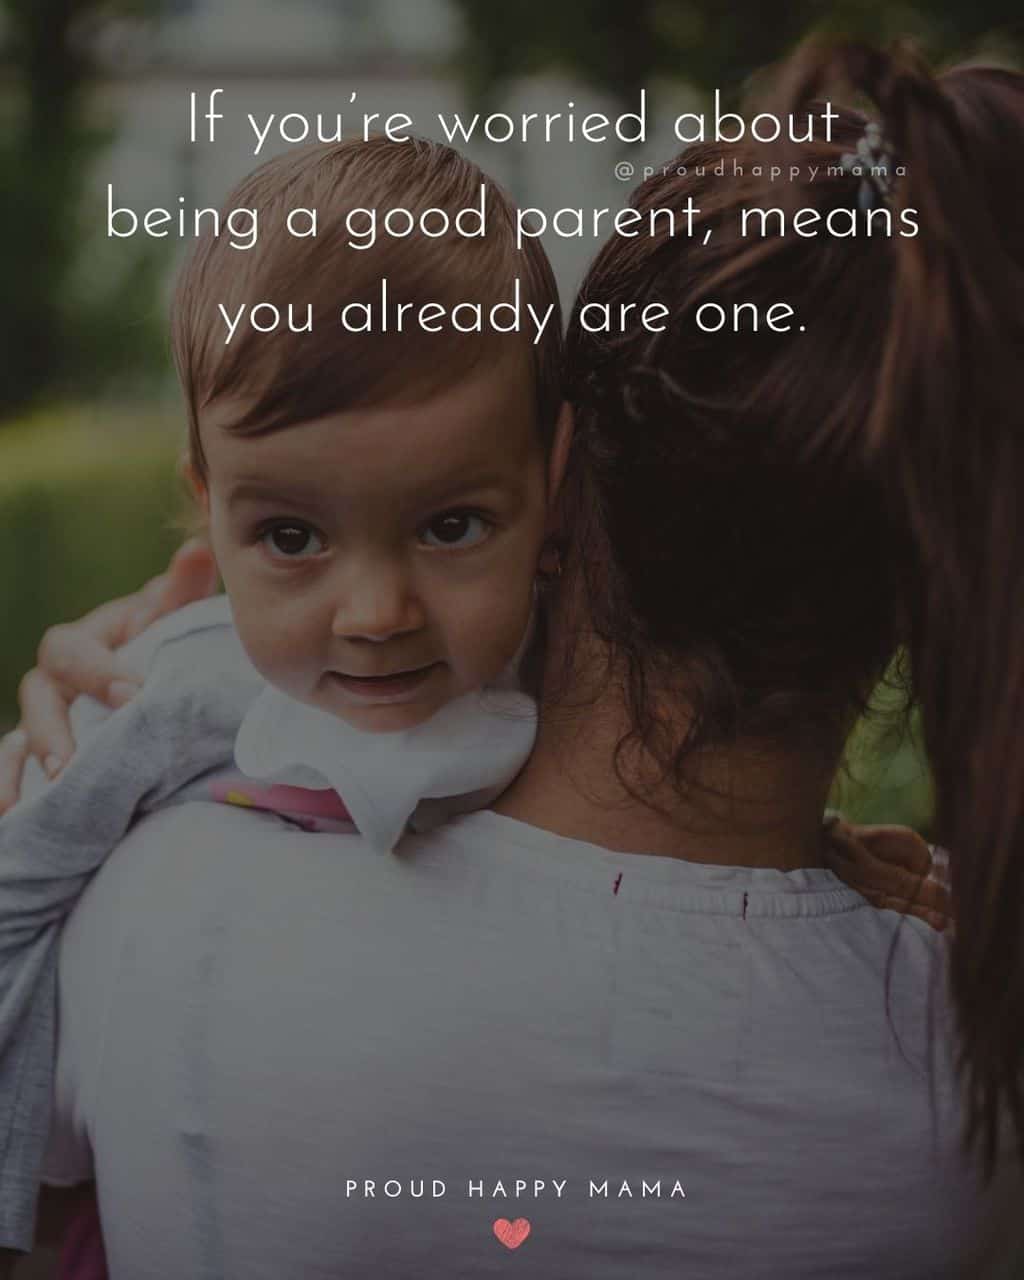 Parenting Quotes - If you’re worried about being a good parent, it means you already are one.’